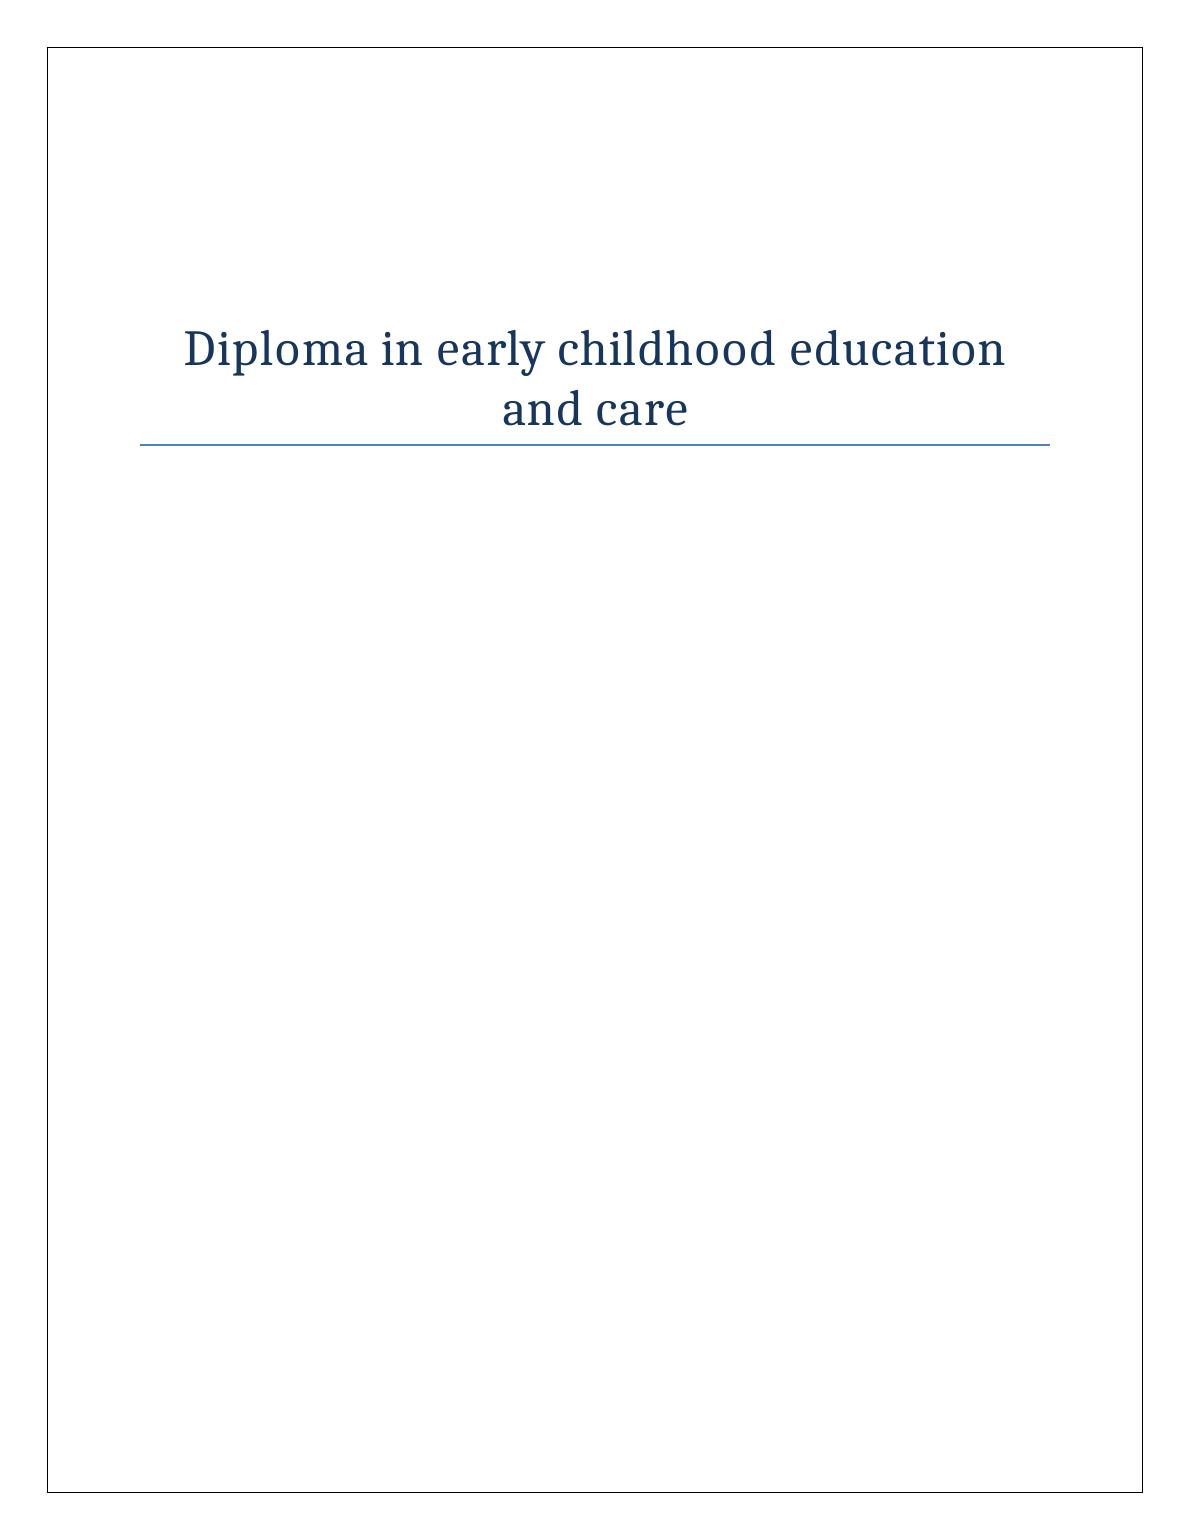 Diploma in Early Childhood Education and Care Research Paper 2022_1